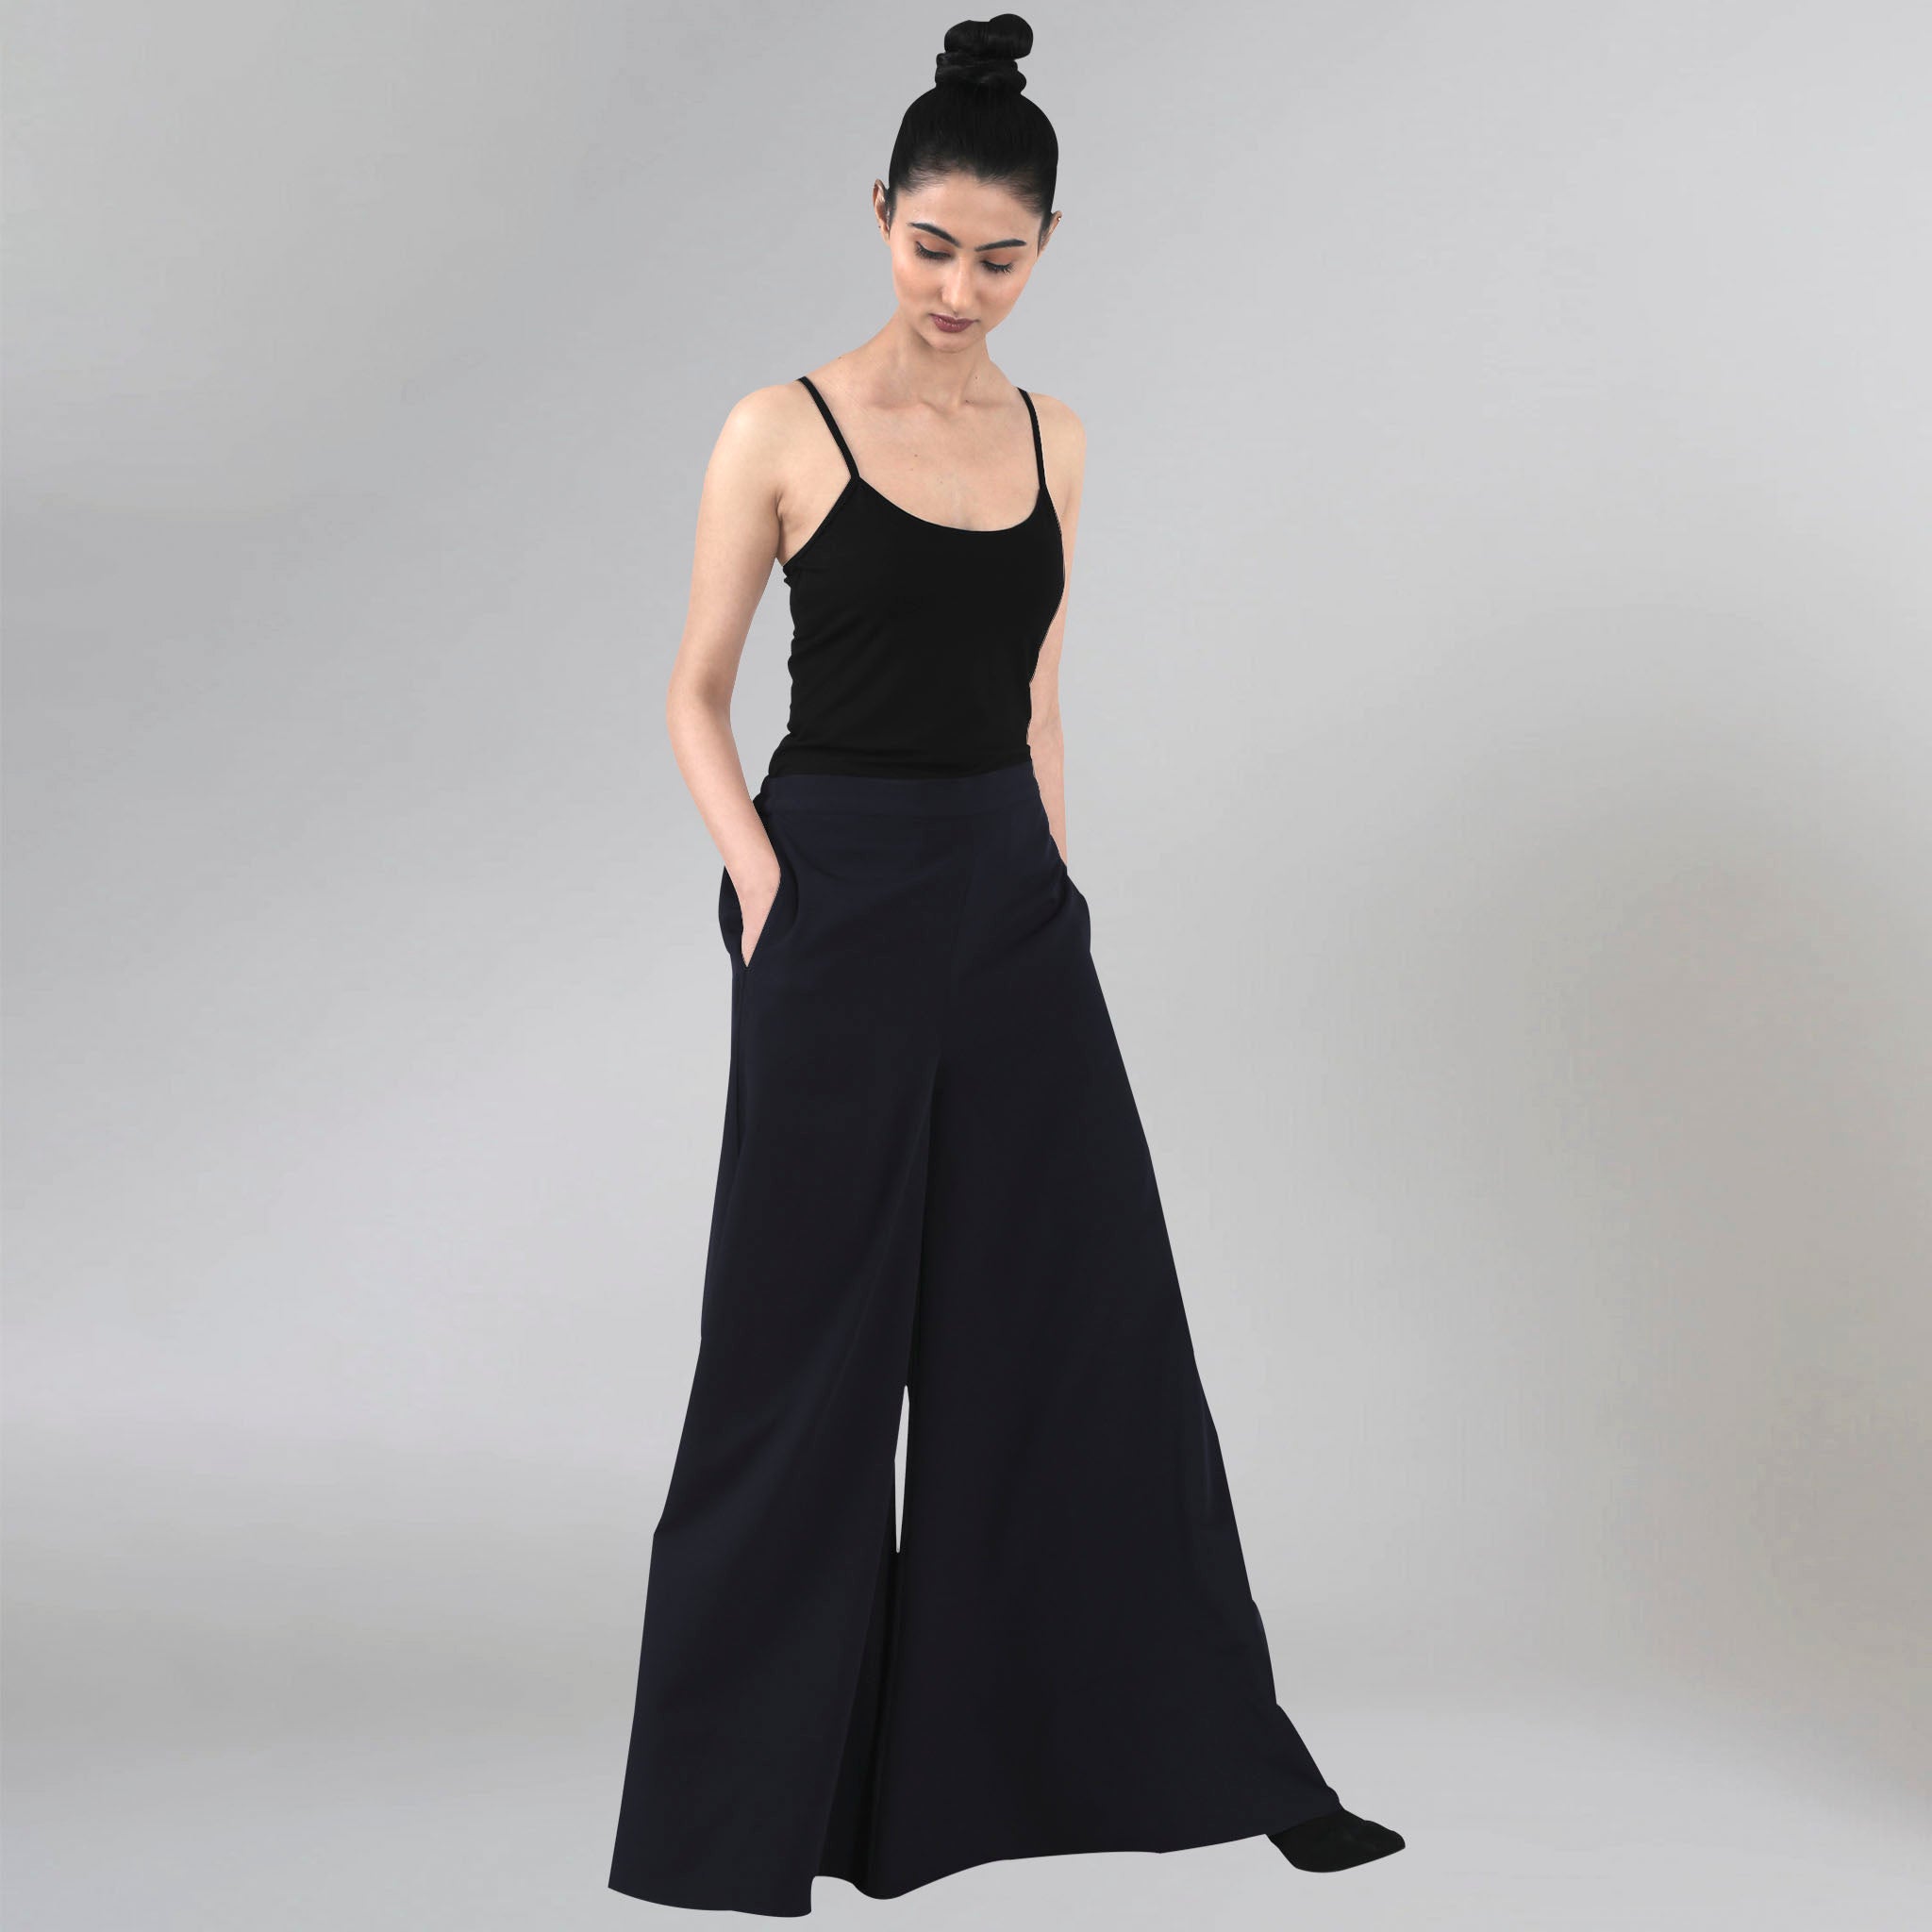 Buy Broadstar Women Black Wide Leg Loose Fit High-Rise Stretchable Formal  Trousers(Blk_3) at Amazon.in